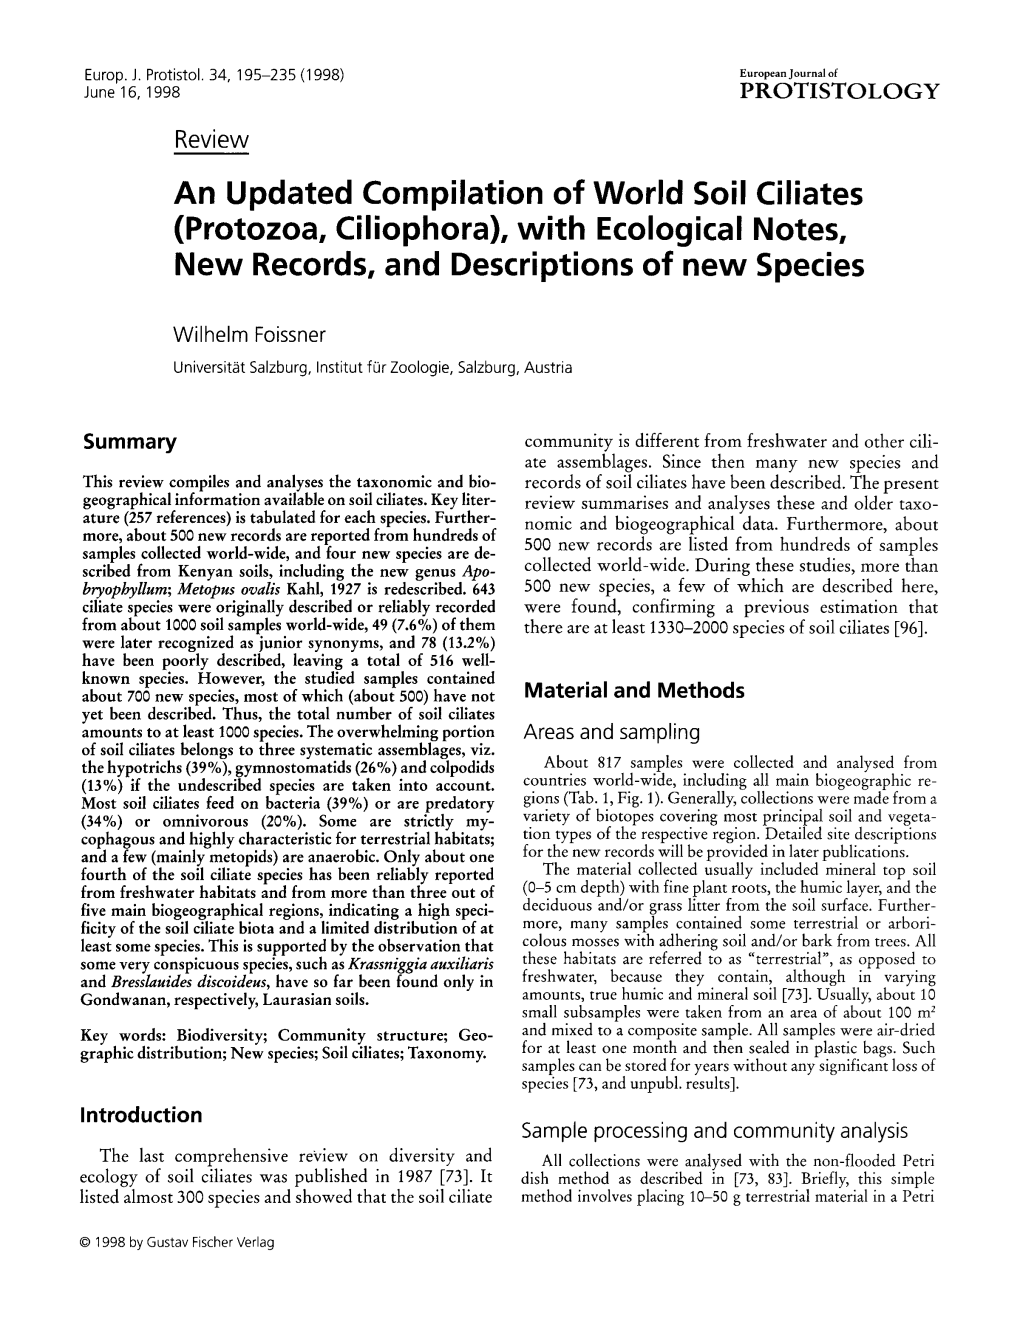 An Updated Compilation of World Soil Ciliates (Protozoa, Ciliophora), with Ecological Notes, New Records, and Descriptions of New Species